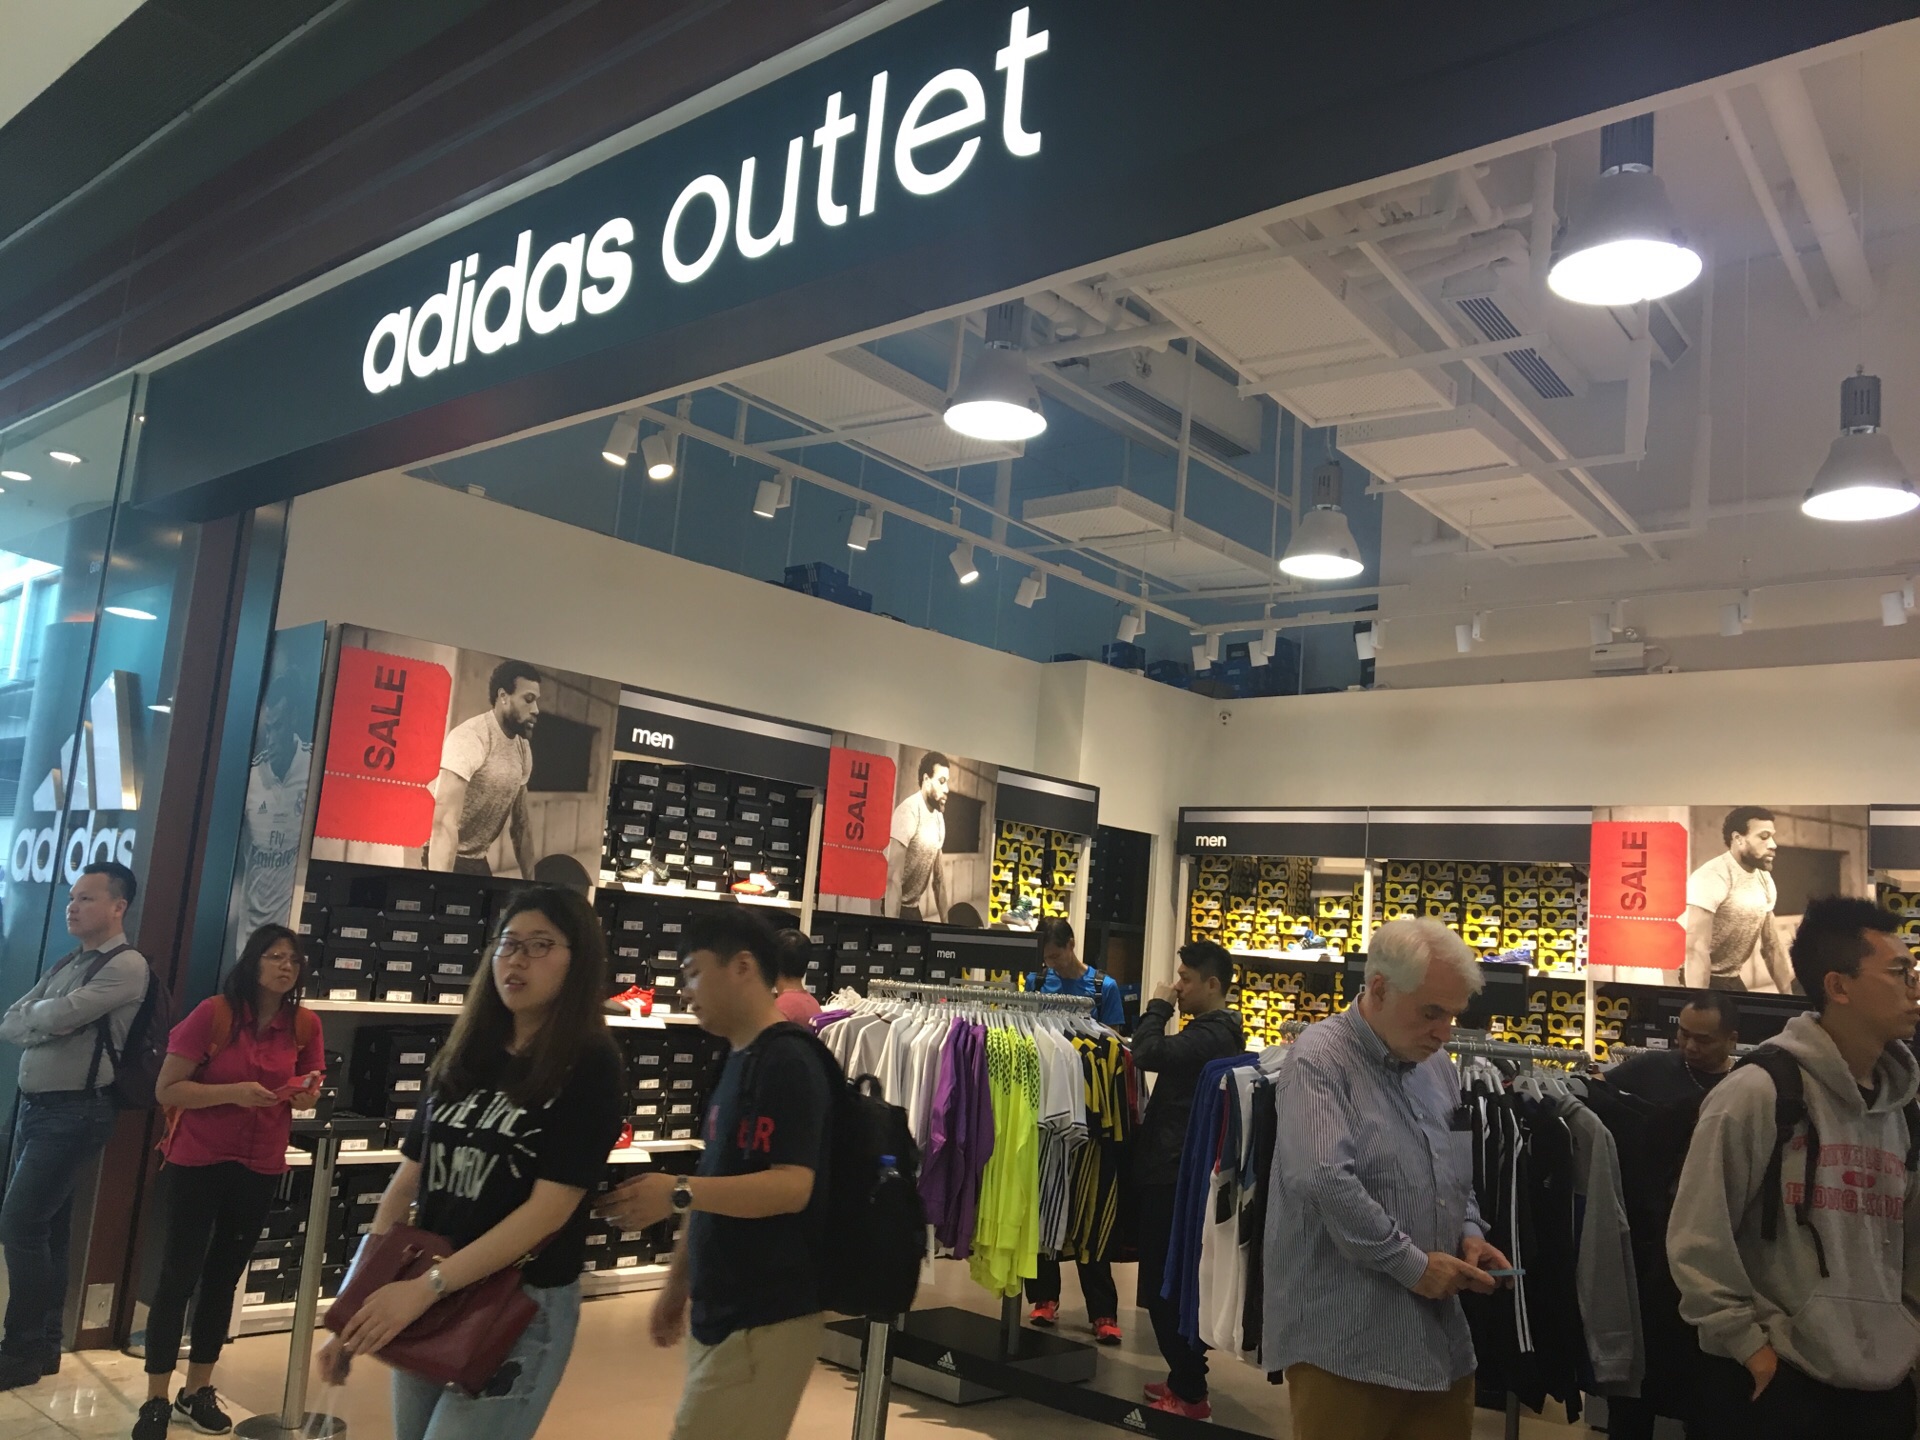 Shopping itineraries in Adidas Factory Outlets in 2023-06-03T17:00:00-07:00  (updated in 2023-06-03T17:00:00-07:00) - Trip.com